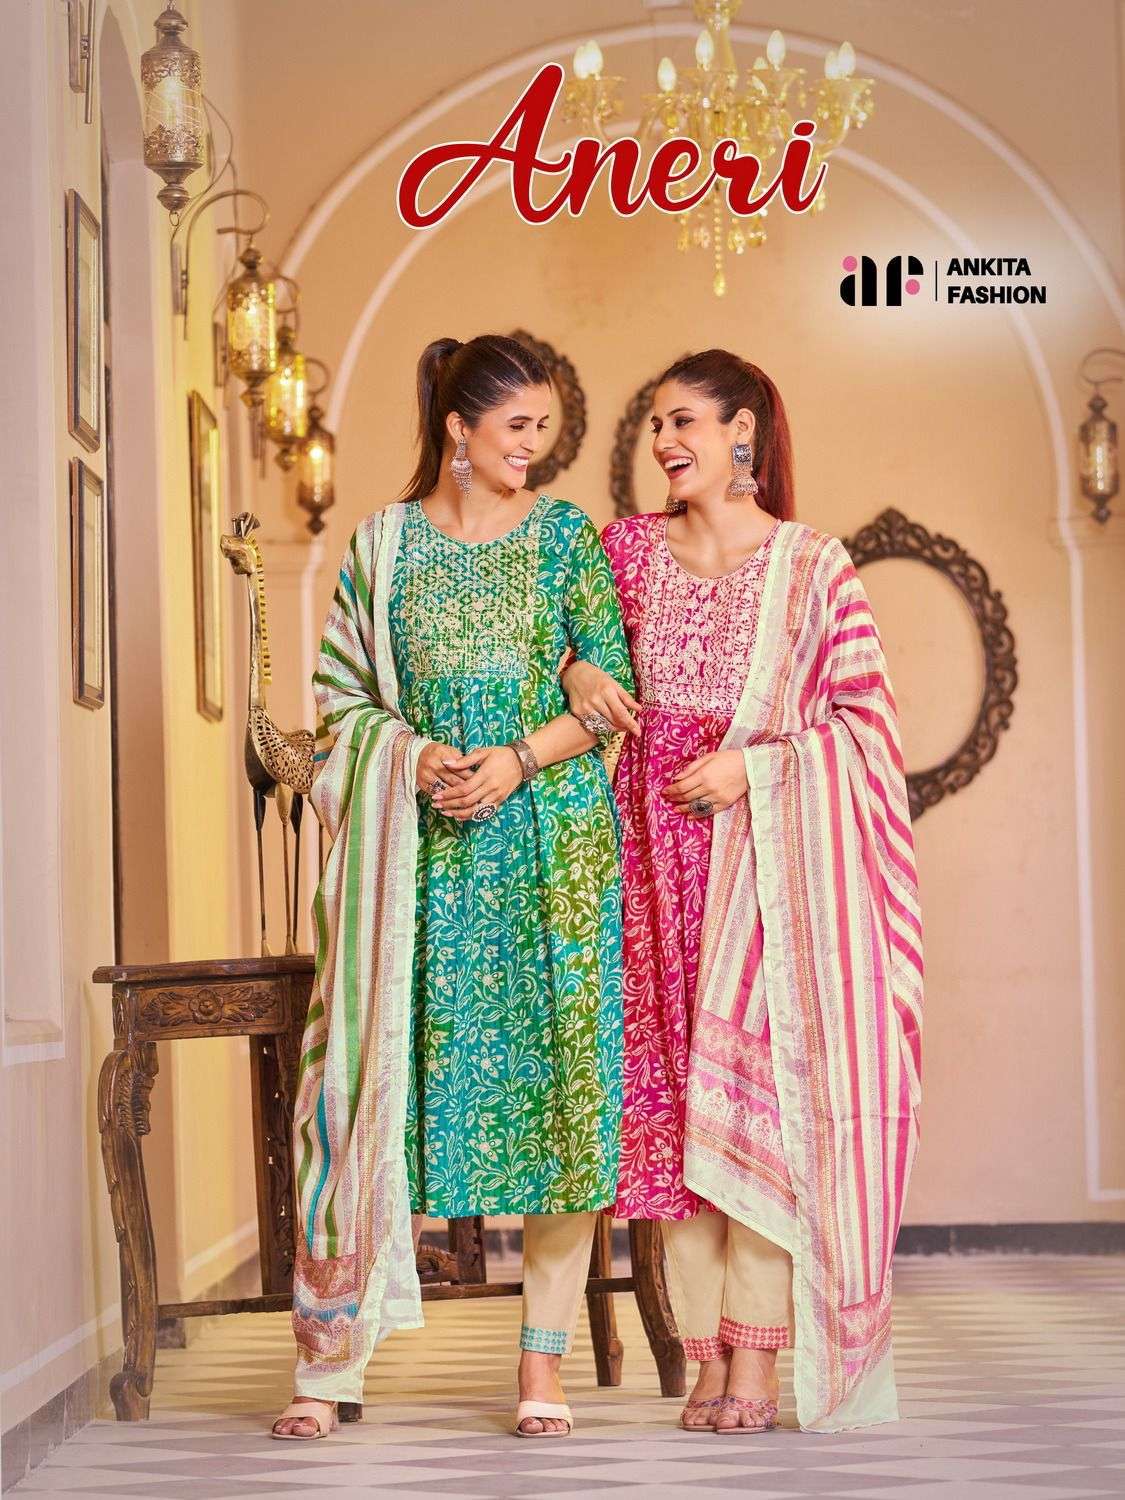 Aneri By Ankita Fashion 5001 To 5006 Series Designer Festive Suits Beautiful Fancy Colorful Stylish Party Wear & Occasional Wear Pure Mal Cotton Dresses At Wholesale Price